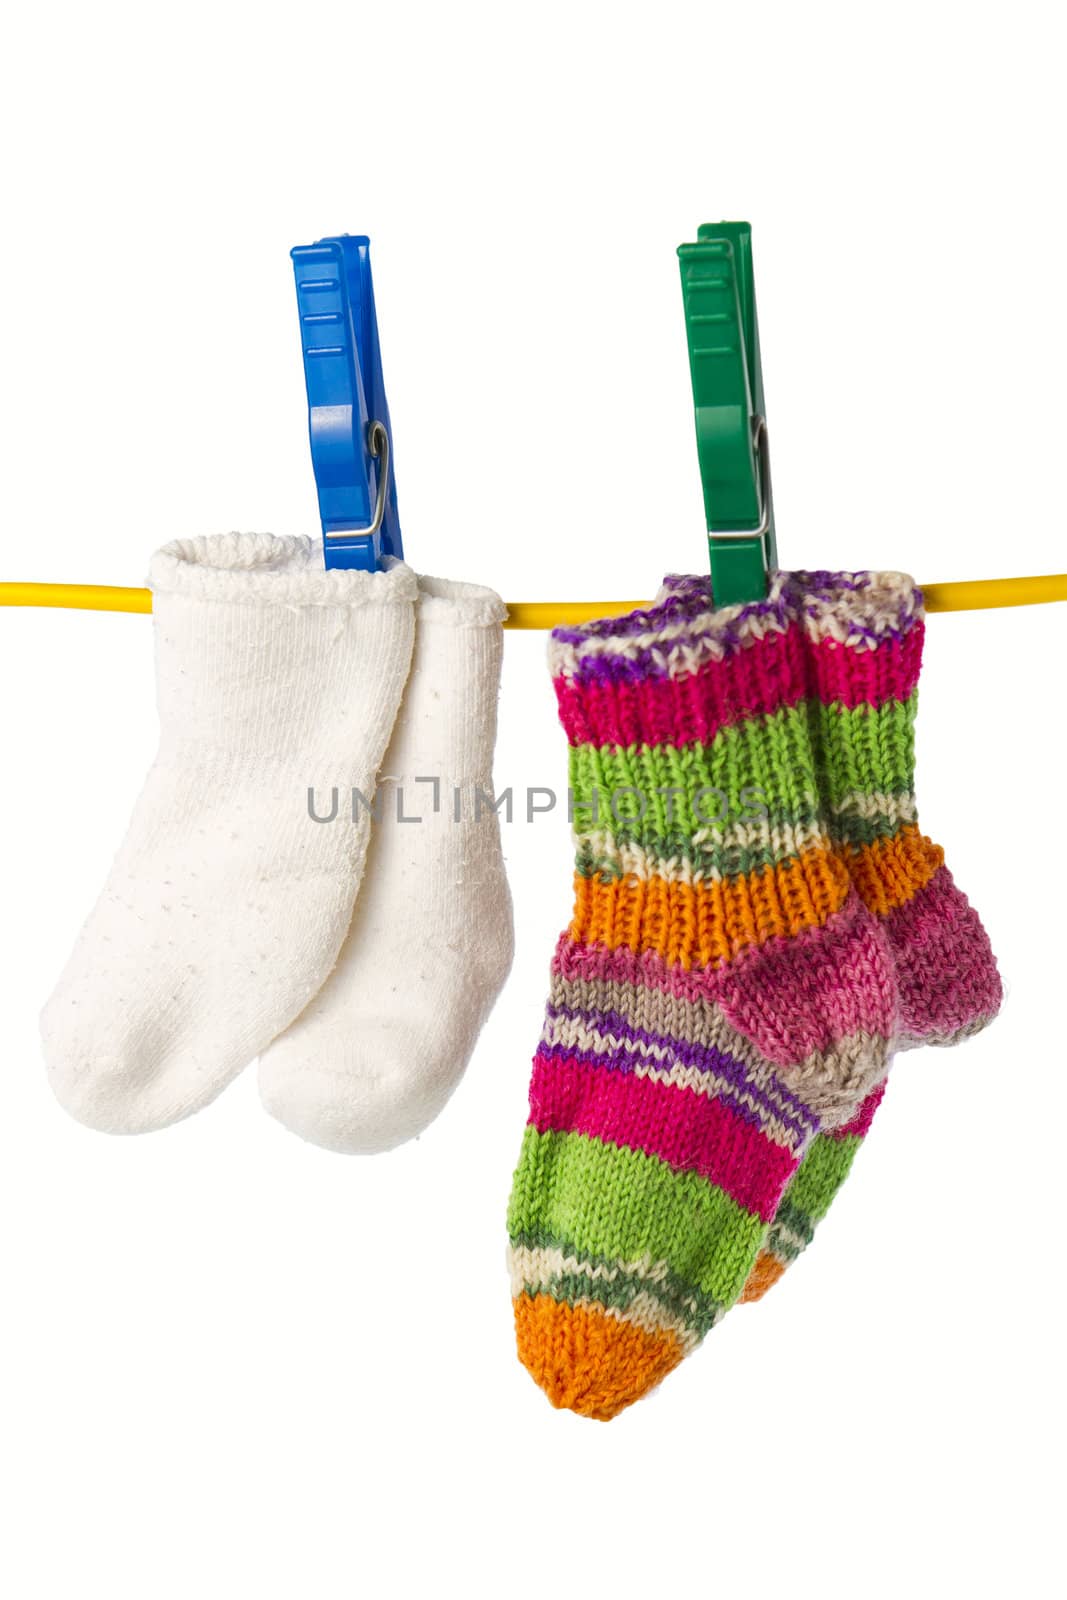 four baby socks on yellow clothesline with clothespin in white background